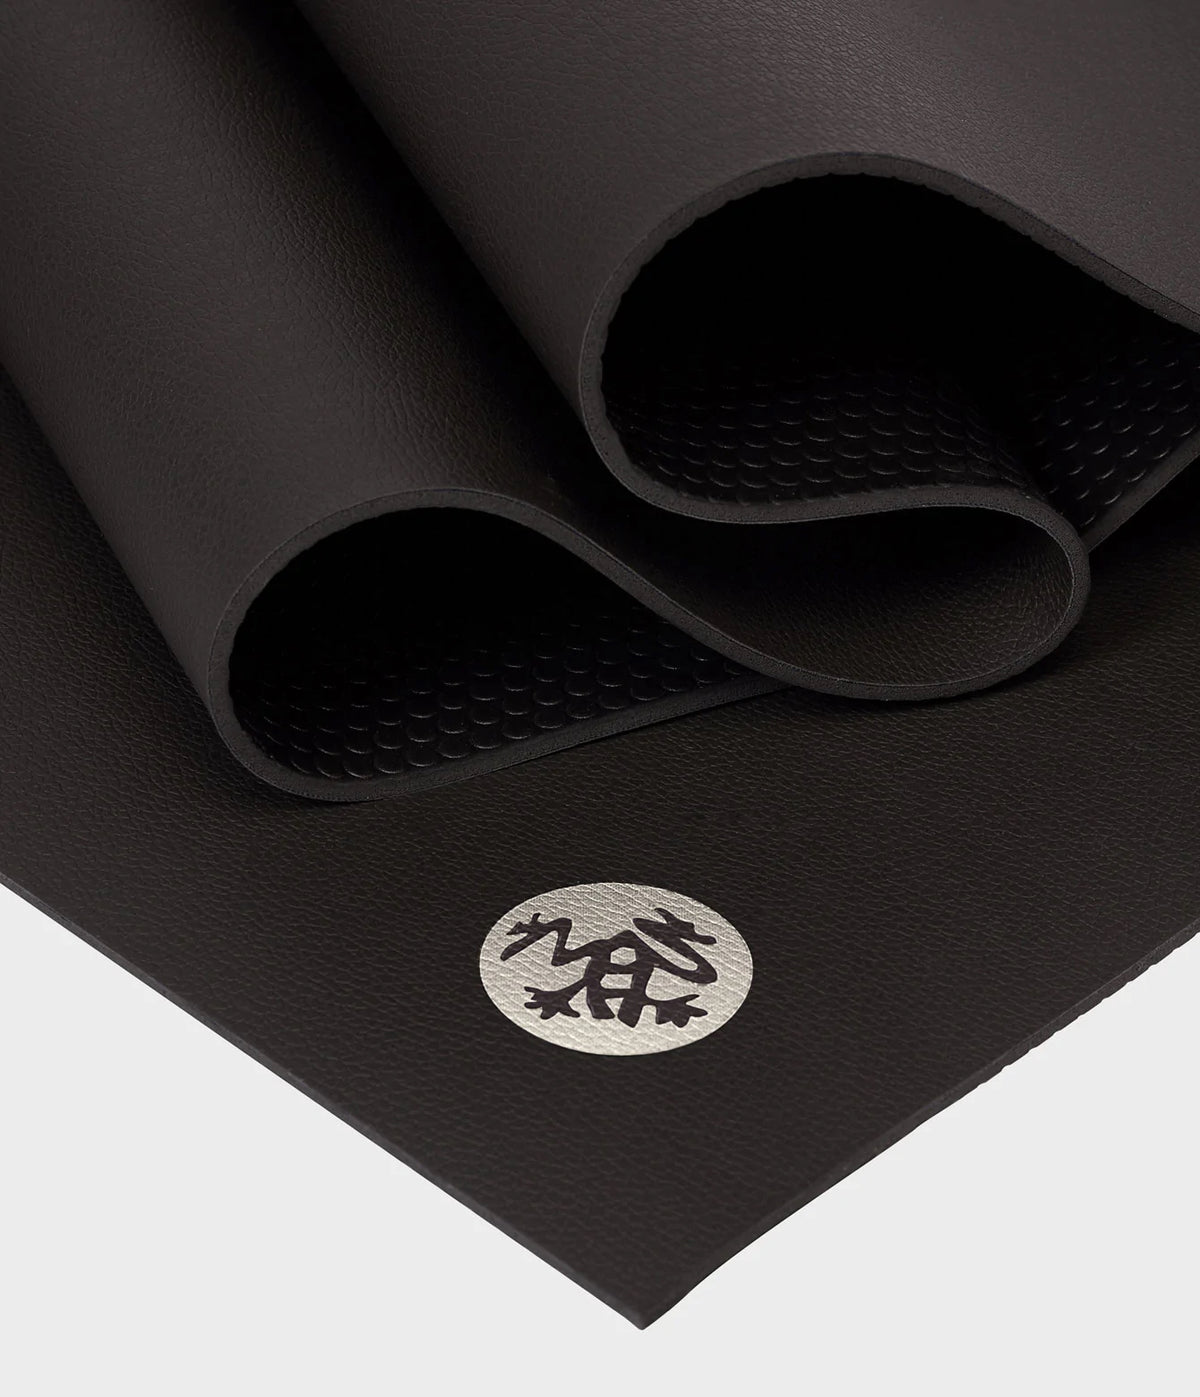 GRP® Adapt Yoga Mat 5mm Mats Practice on with our grippiest mat